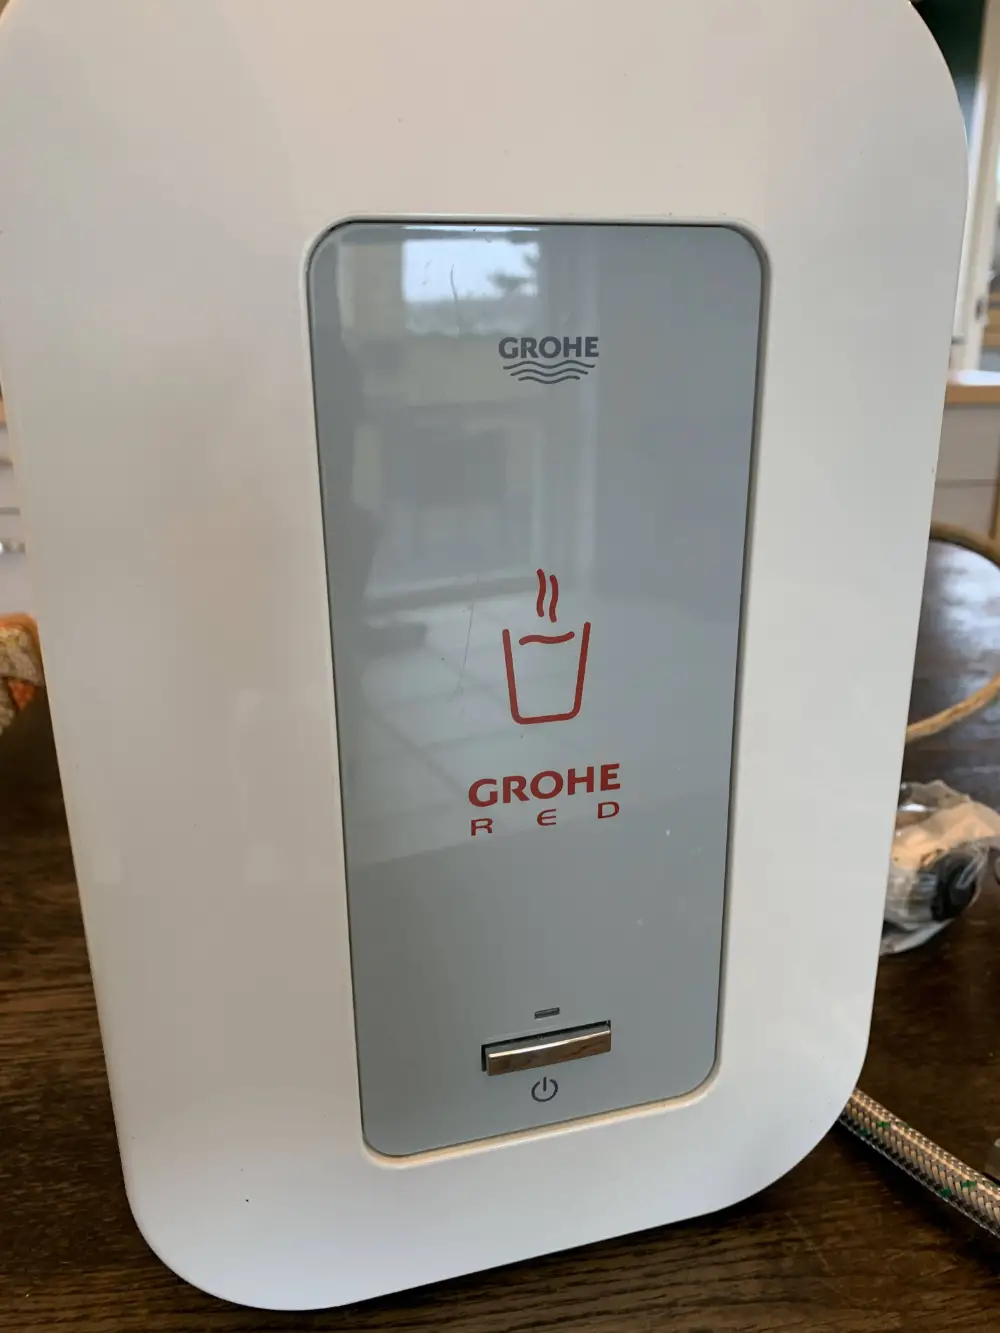 Grohe Grohe RED dual quooker